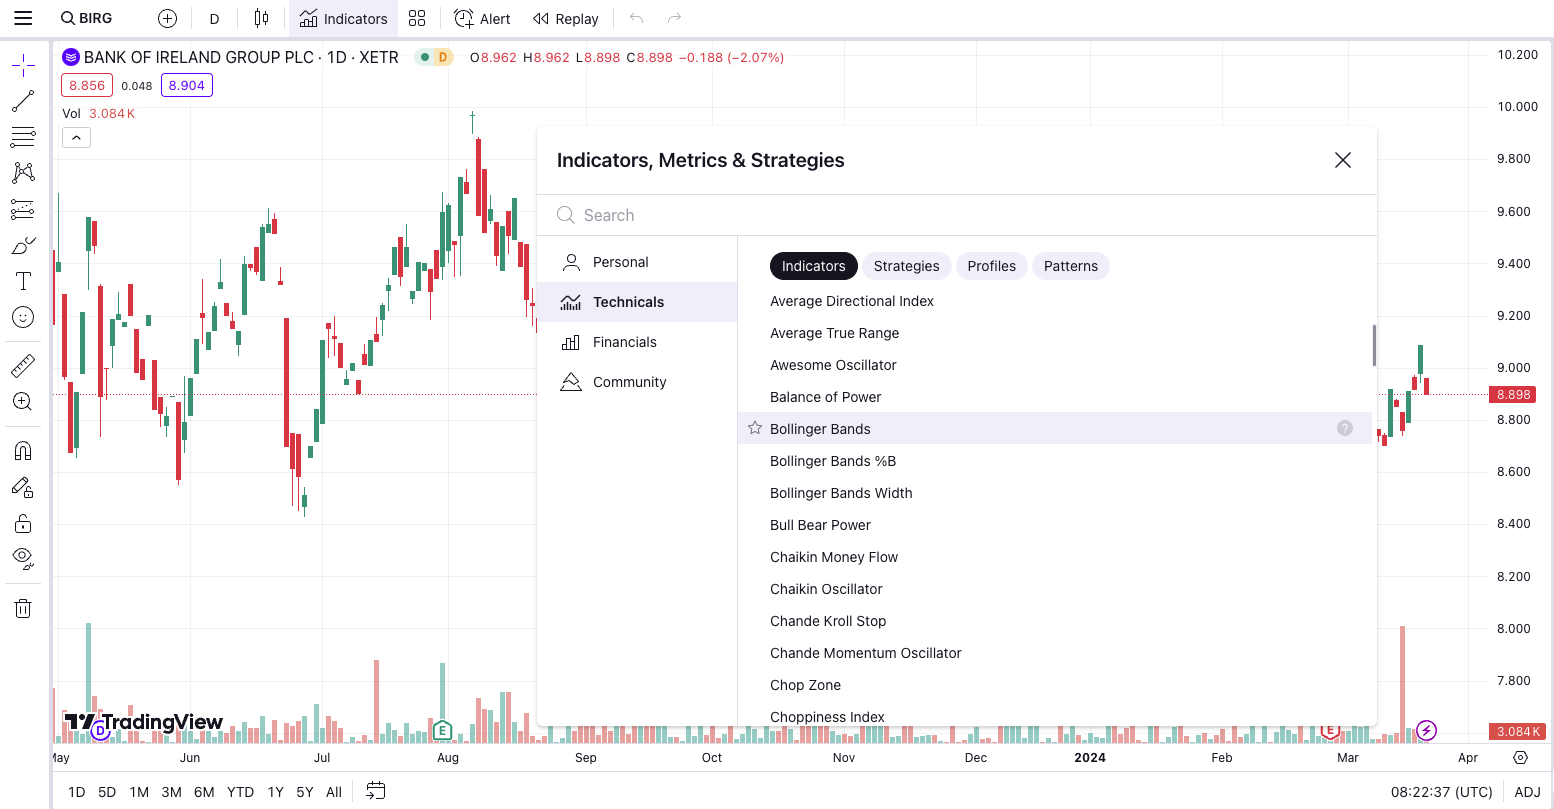 TradingView charting platform with Bank of Ireland